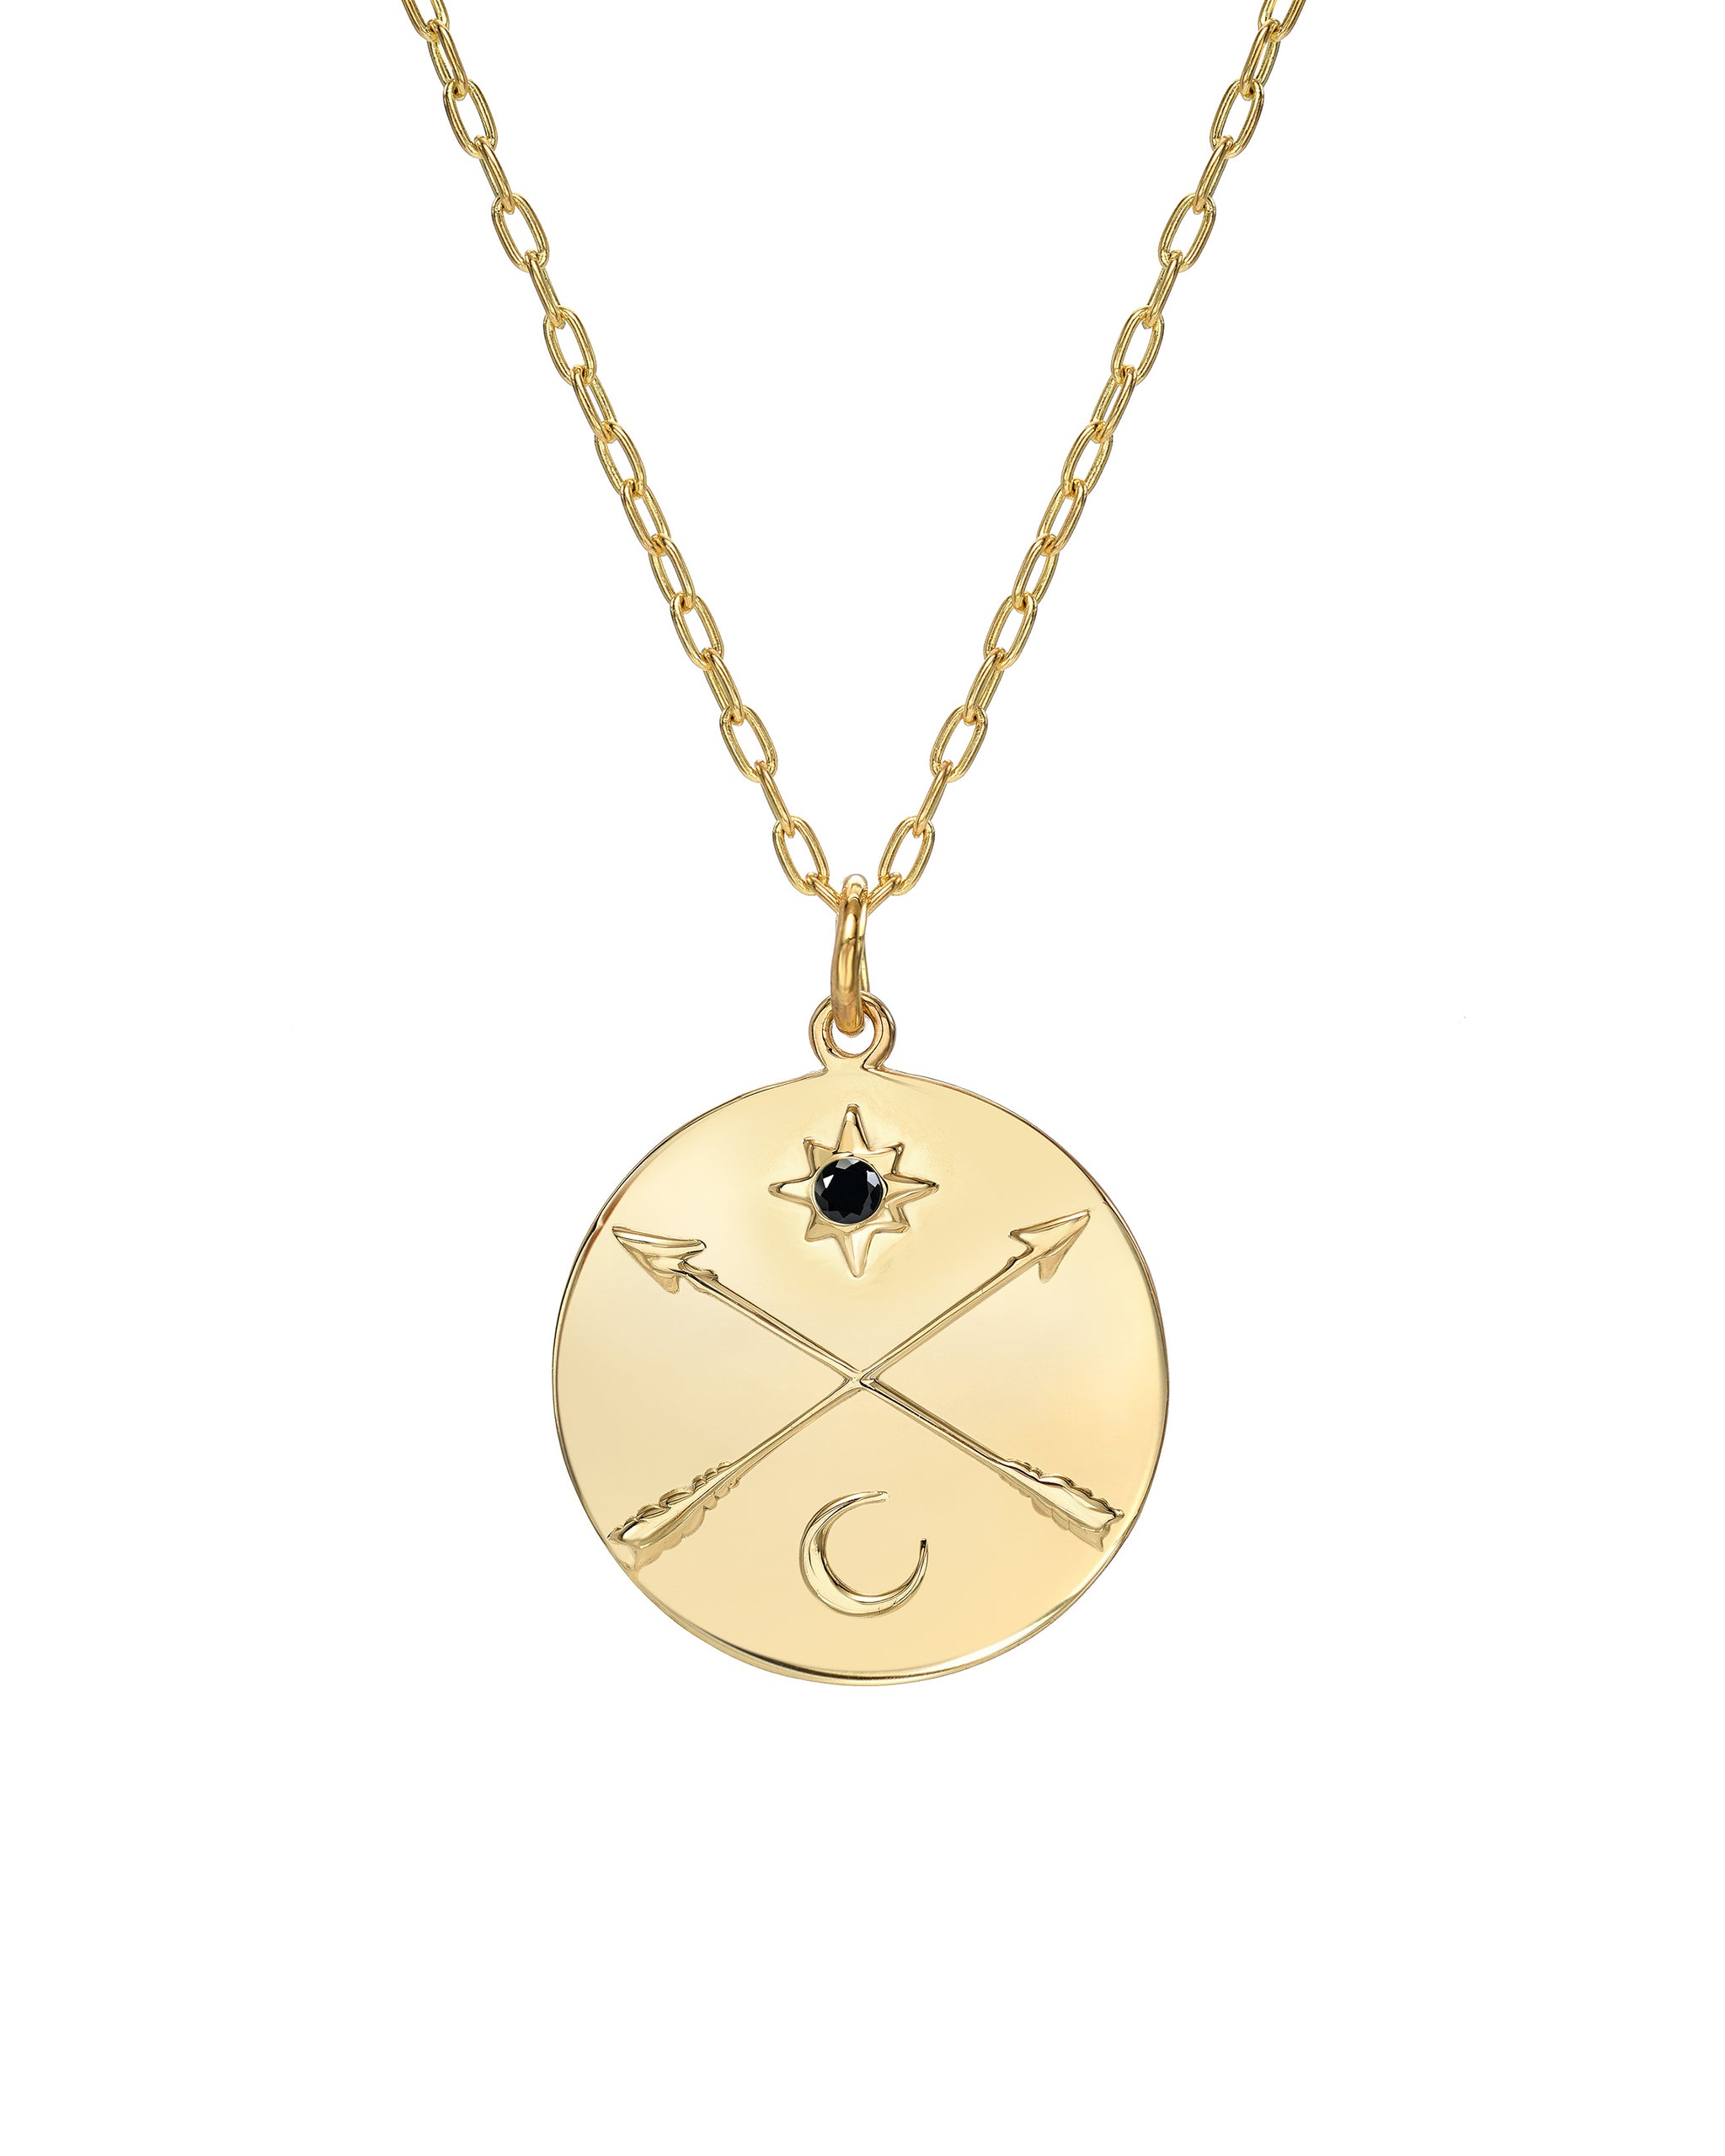 Nomad Necklace, 14k Gold Vermeil Medallion with Crossed Arrows, Sun and Moon and Sleeping Beauty Turquoise, on a 16"-18" Adjustable Chain, Handmade in Los Angeles, California